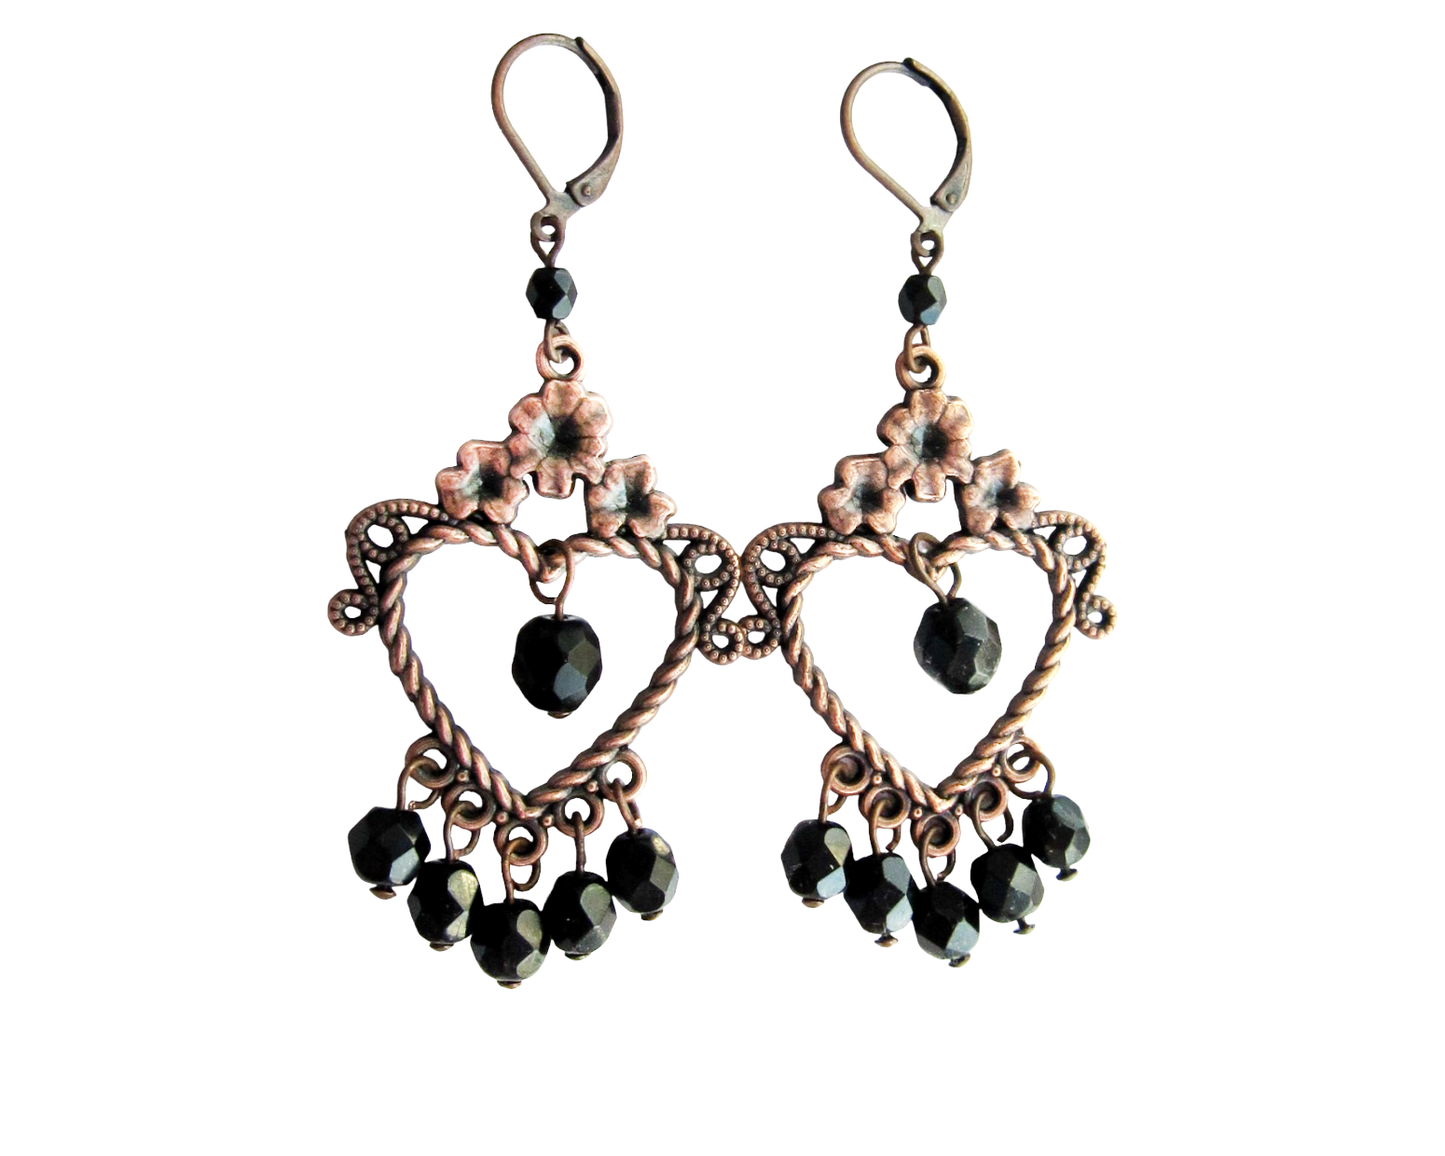 Large Antiqued Copper Heart Chandelier Earrings with Floral Designs and  Black Sparkly crystal dangles. 